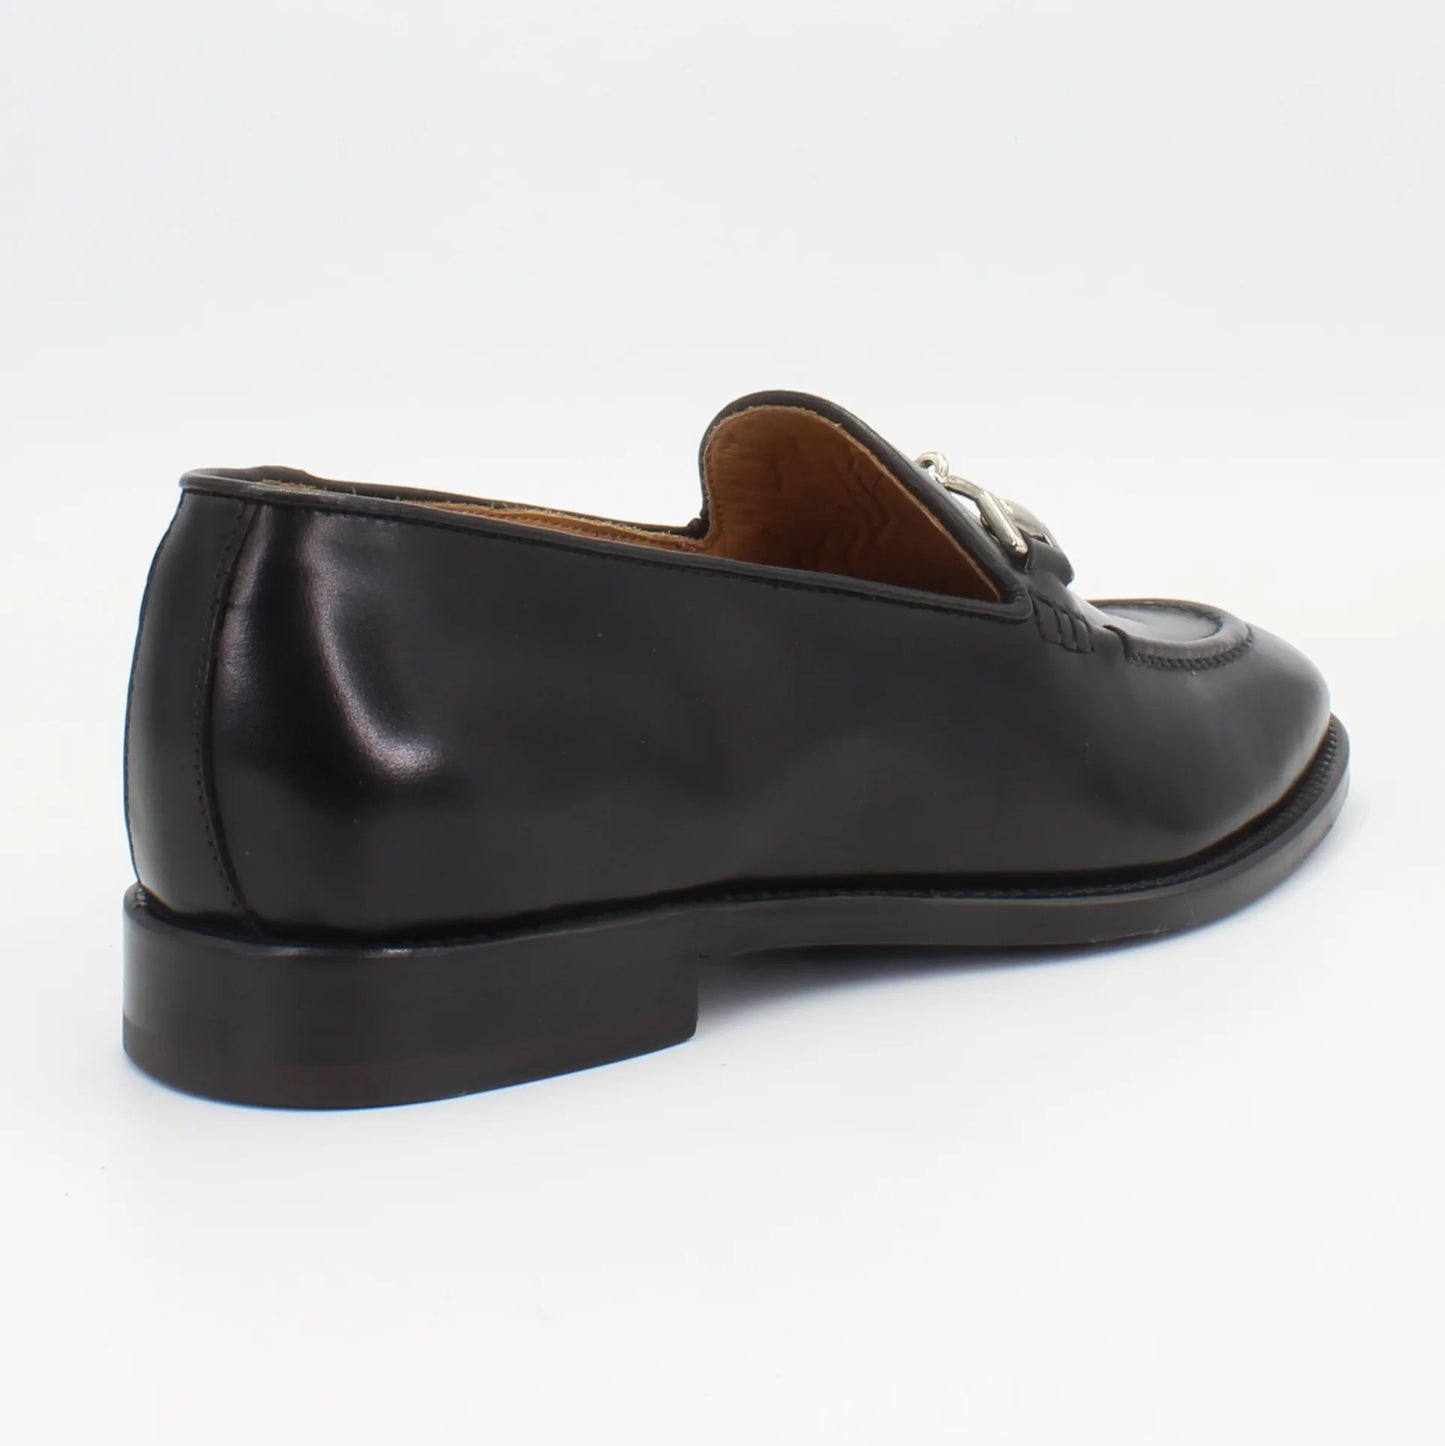 Shop Handmade Italian Leather Moccasin in Nero (BRD9426) or browse our range of hand-made Italian shoes for women in leather or suede in-store at Aliverti Cape Town, or shop online. We deliver in South Africa & offer multiple payment plans as well as accept multiple safe & secure payment methods.